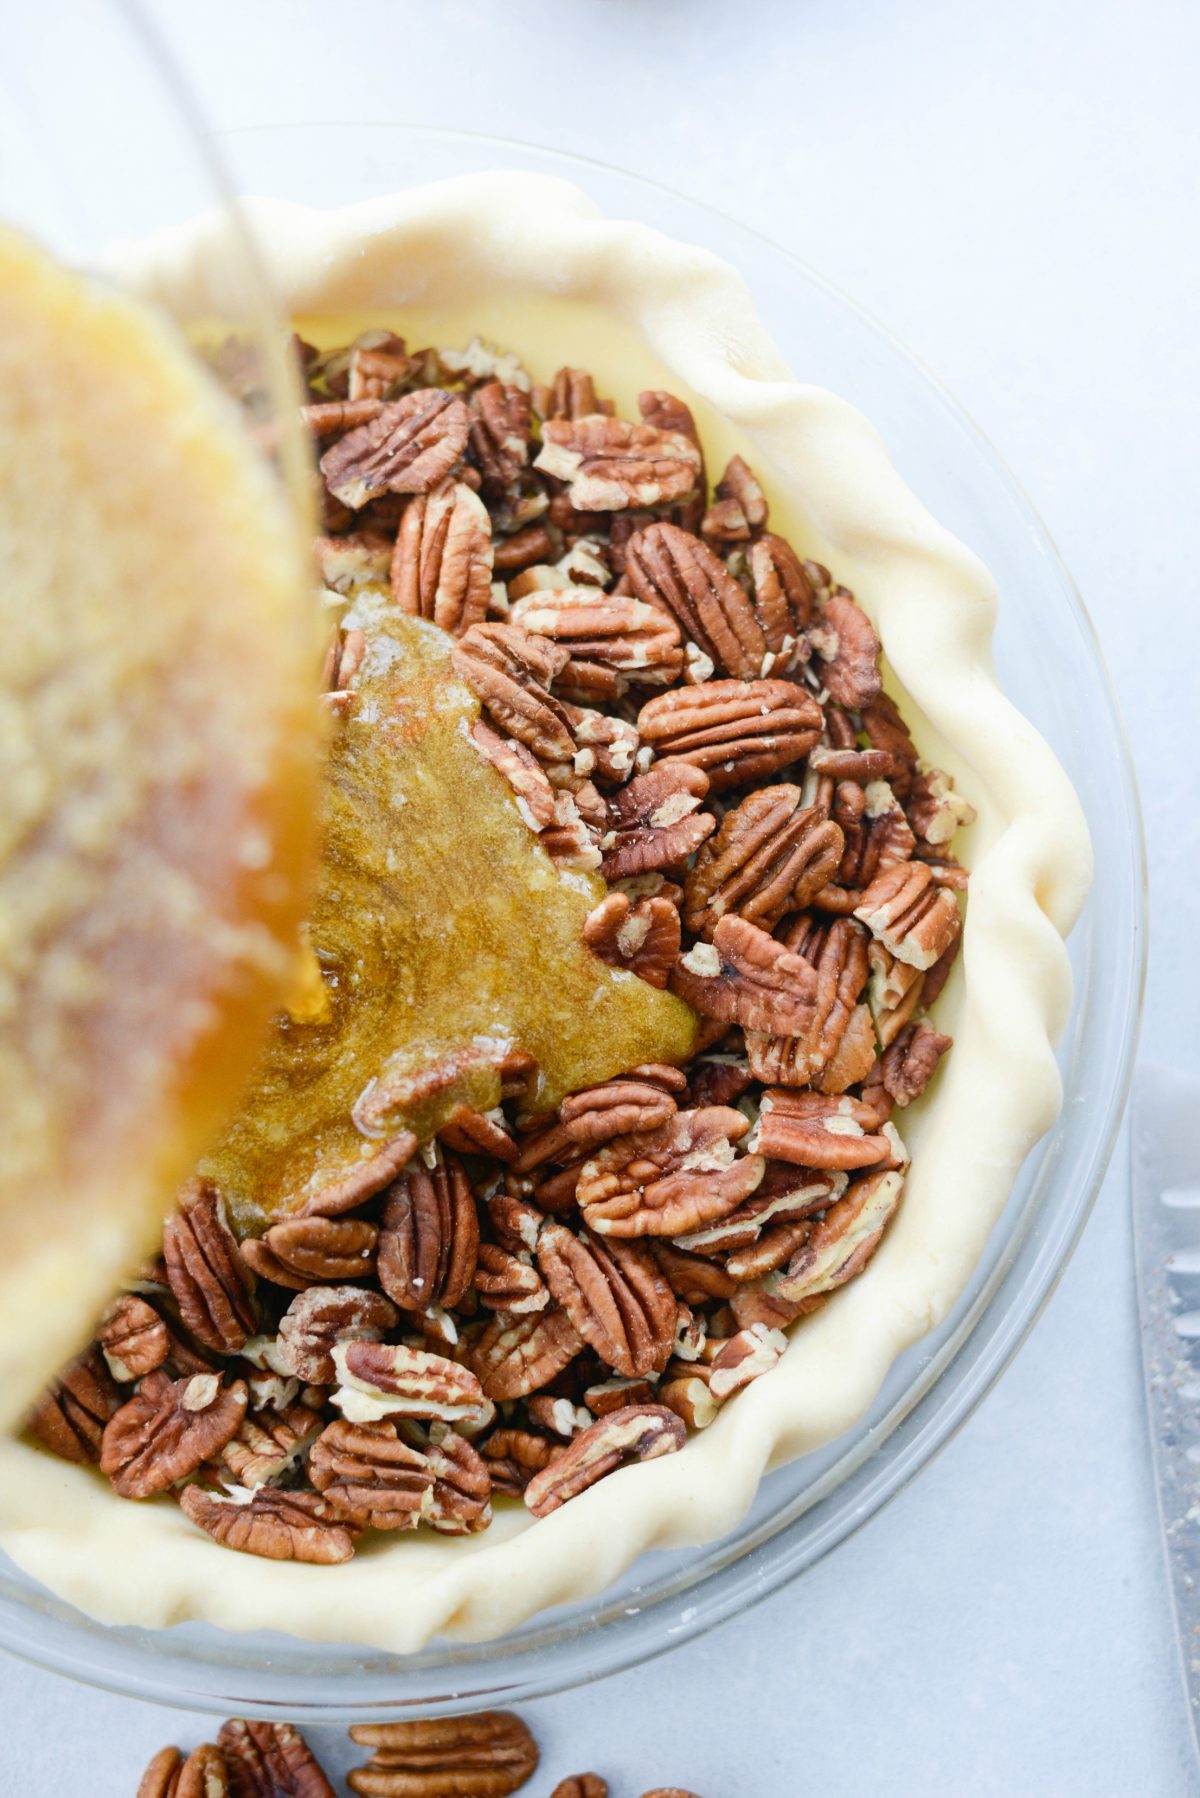 Pour the filling over top of the pecans